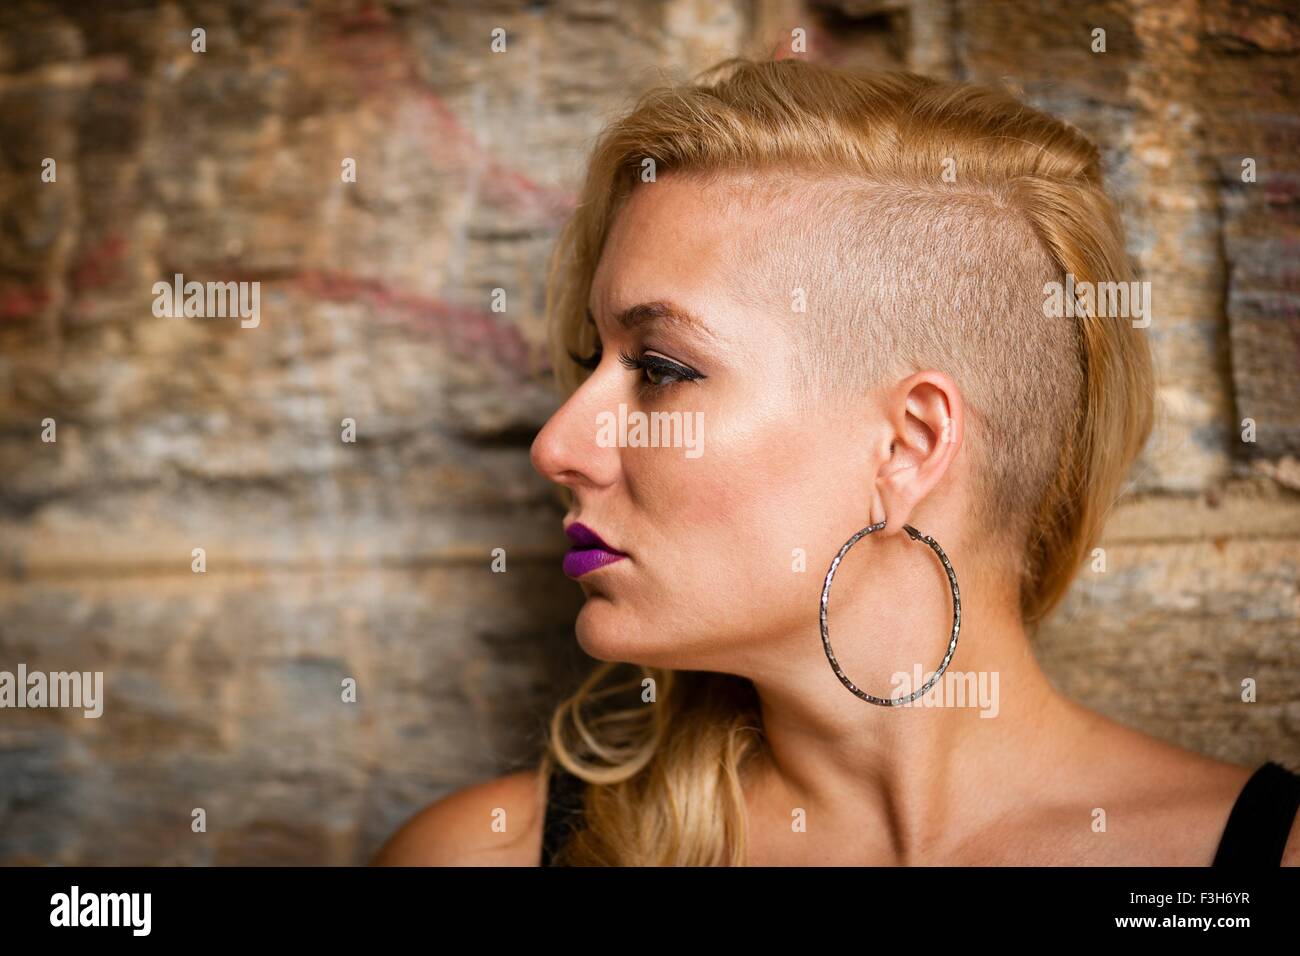 Portrait of mid adult woman with shaved blond hair looking sideways Stock Photo